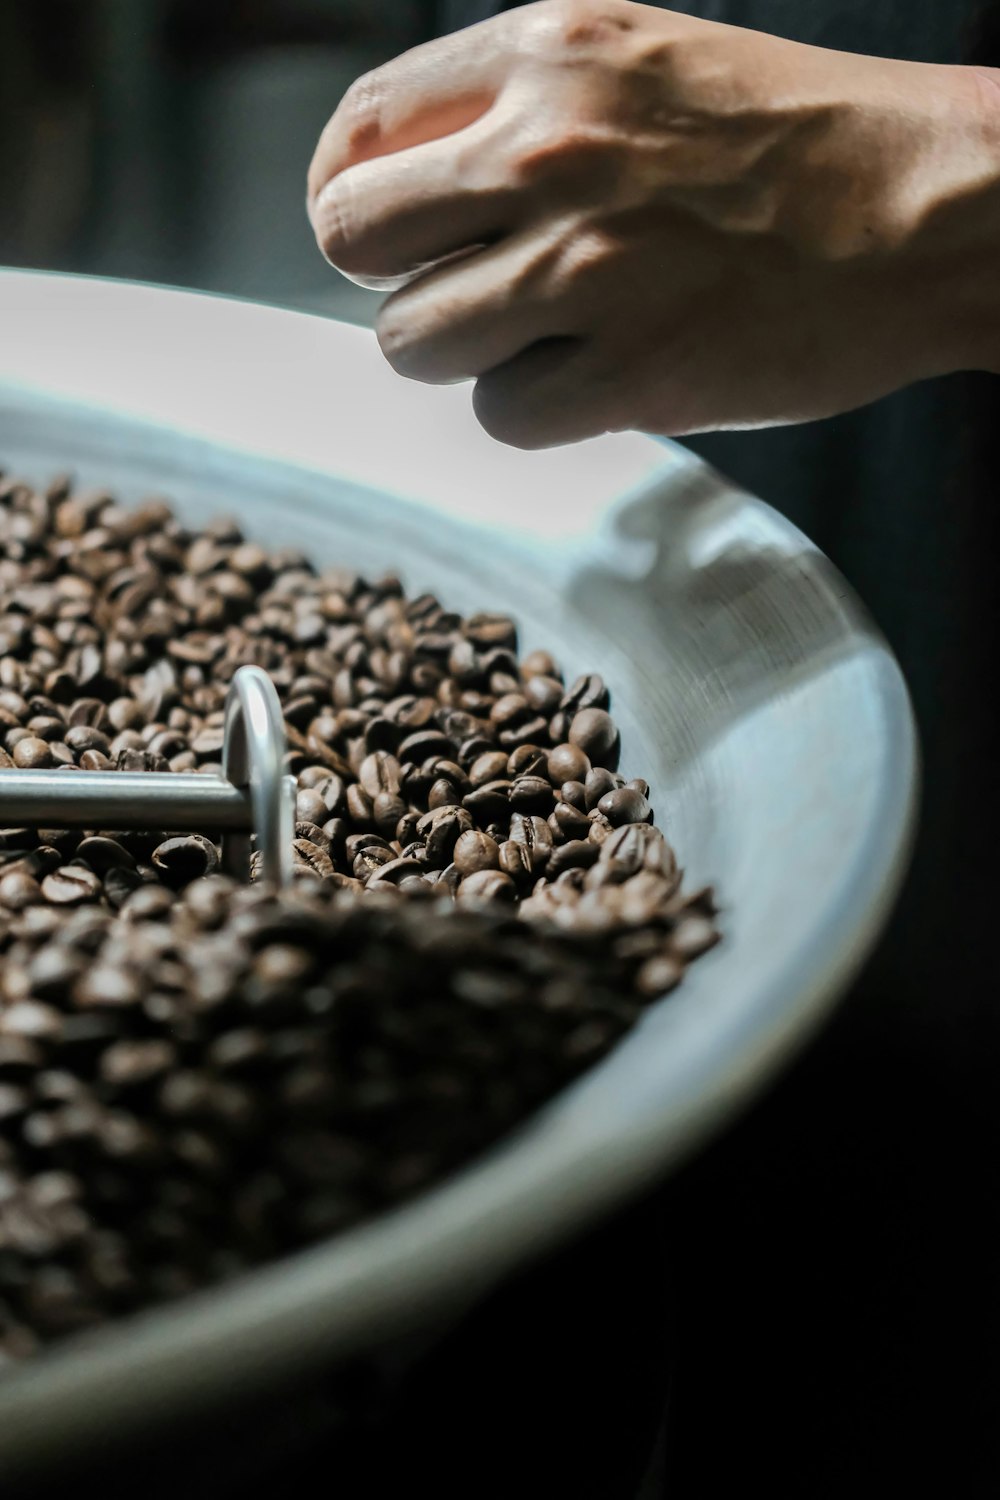 a person scooping coffee beans into a bowl